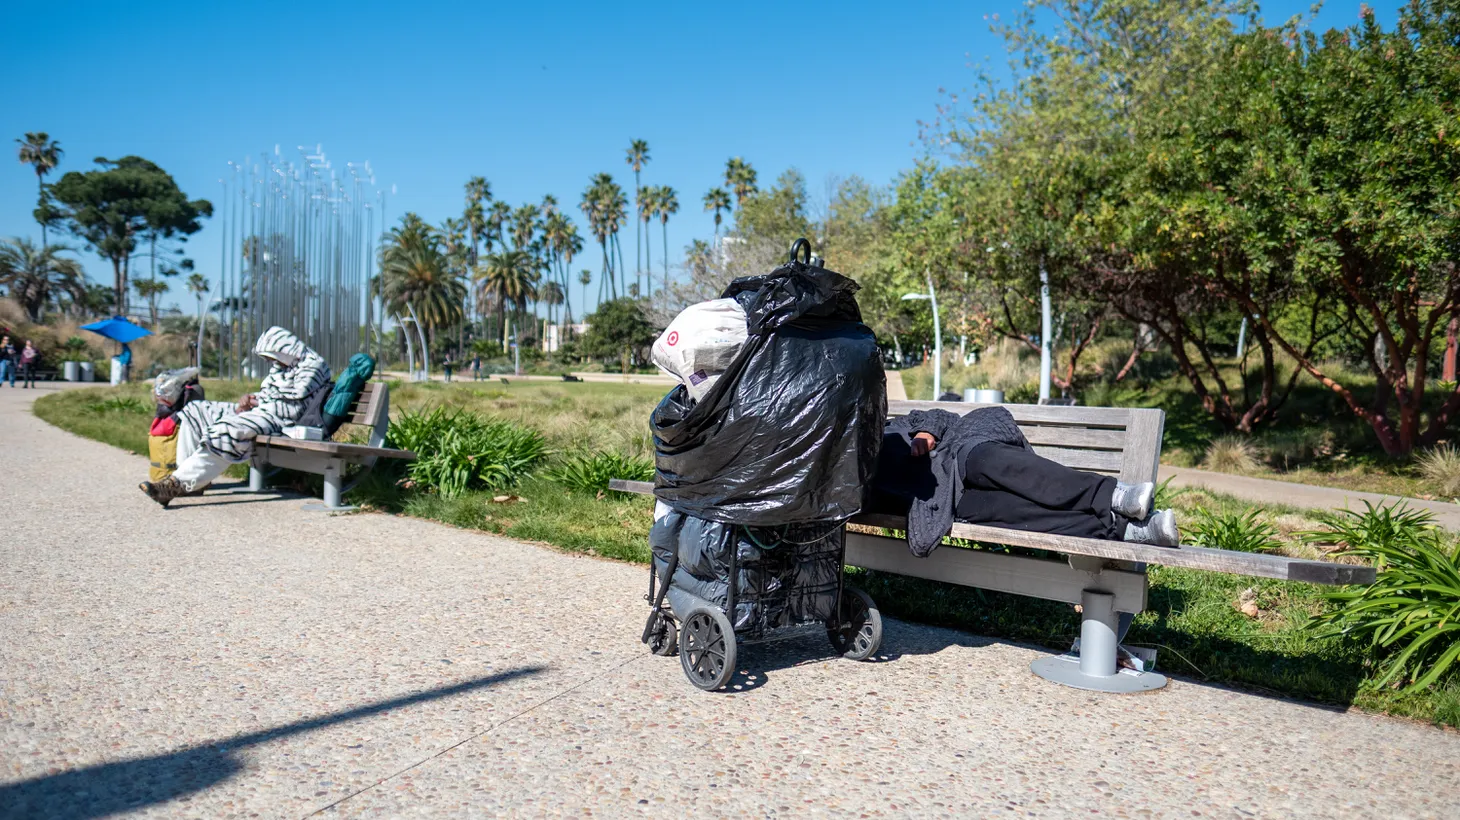 Two unhoused individuals occupy separate benches in Tongva Park, Santa Monica, February 25, 2022. “People become homeless when they have no personal safety net in their family or their network. So they have exhausted all of the resources available to them,” says Janey Rountree, executive director of the California Policy Lab at UCLA. .